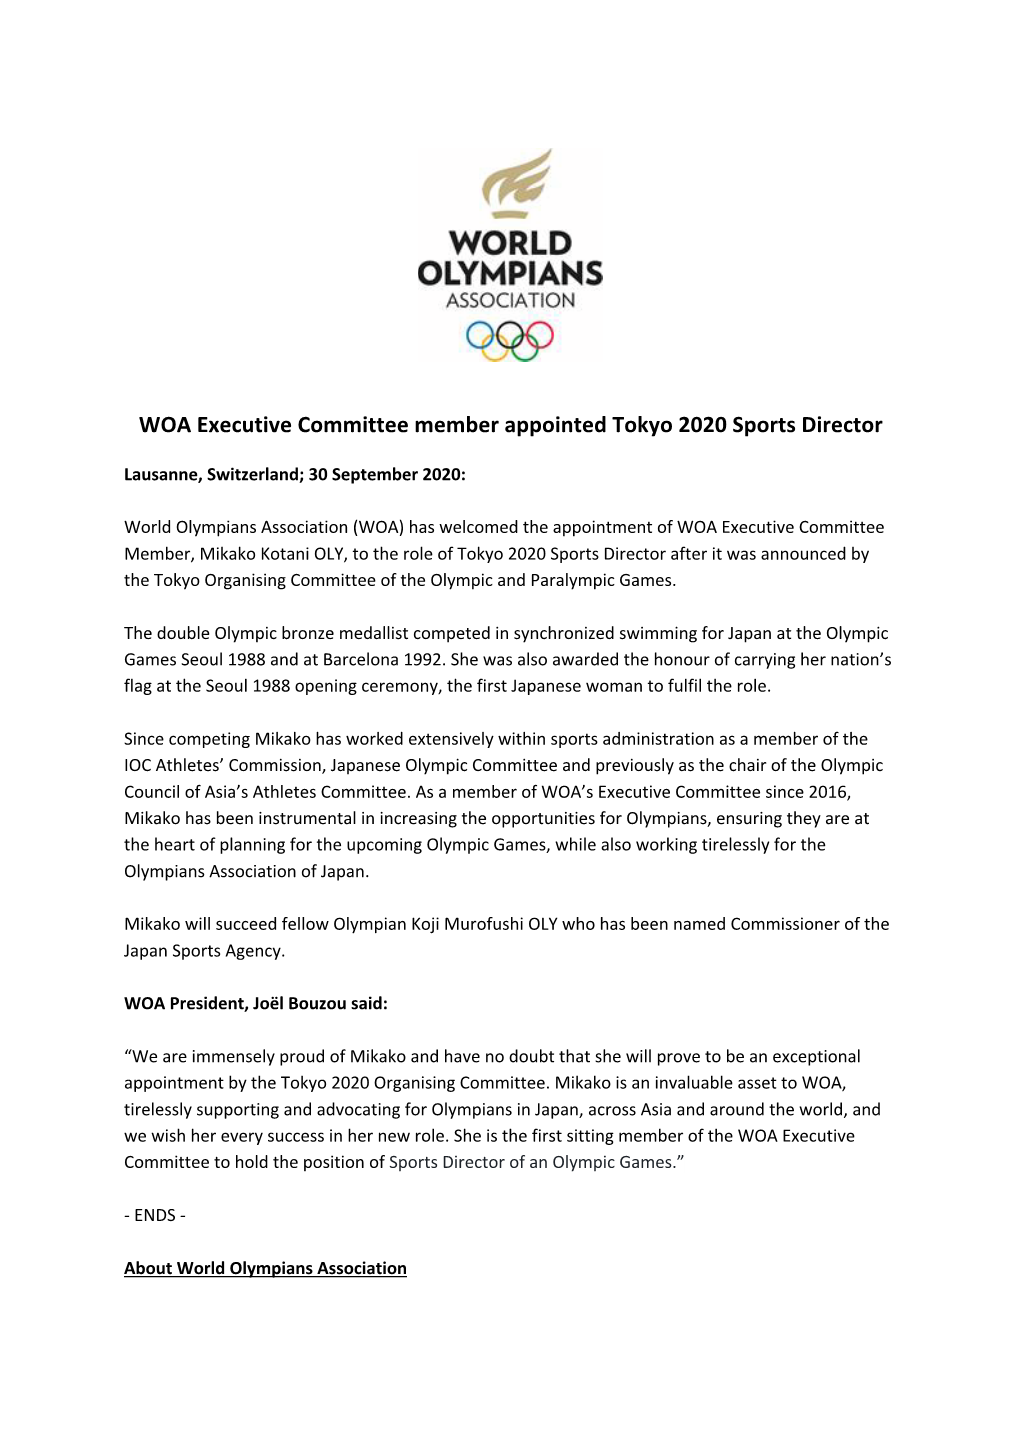 WOA Executive Committee Member Appointed Tokyo 2020 Sports Director